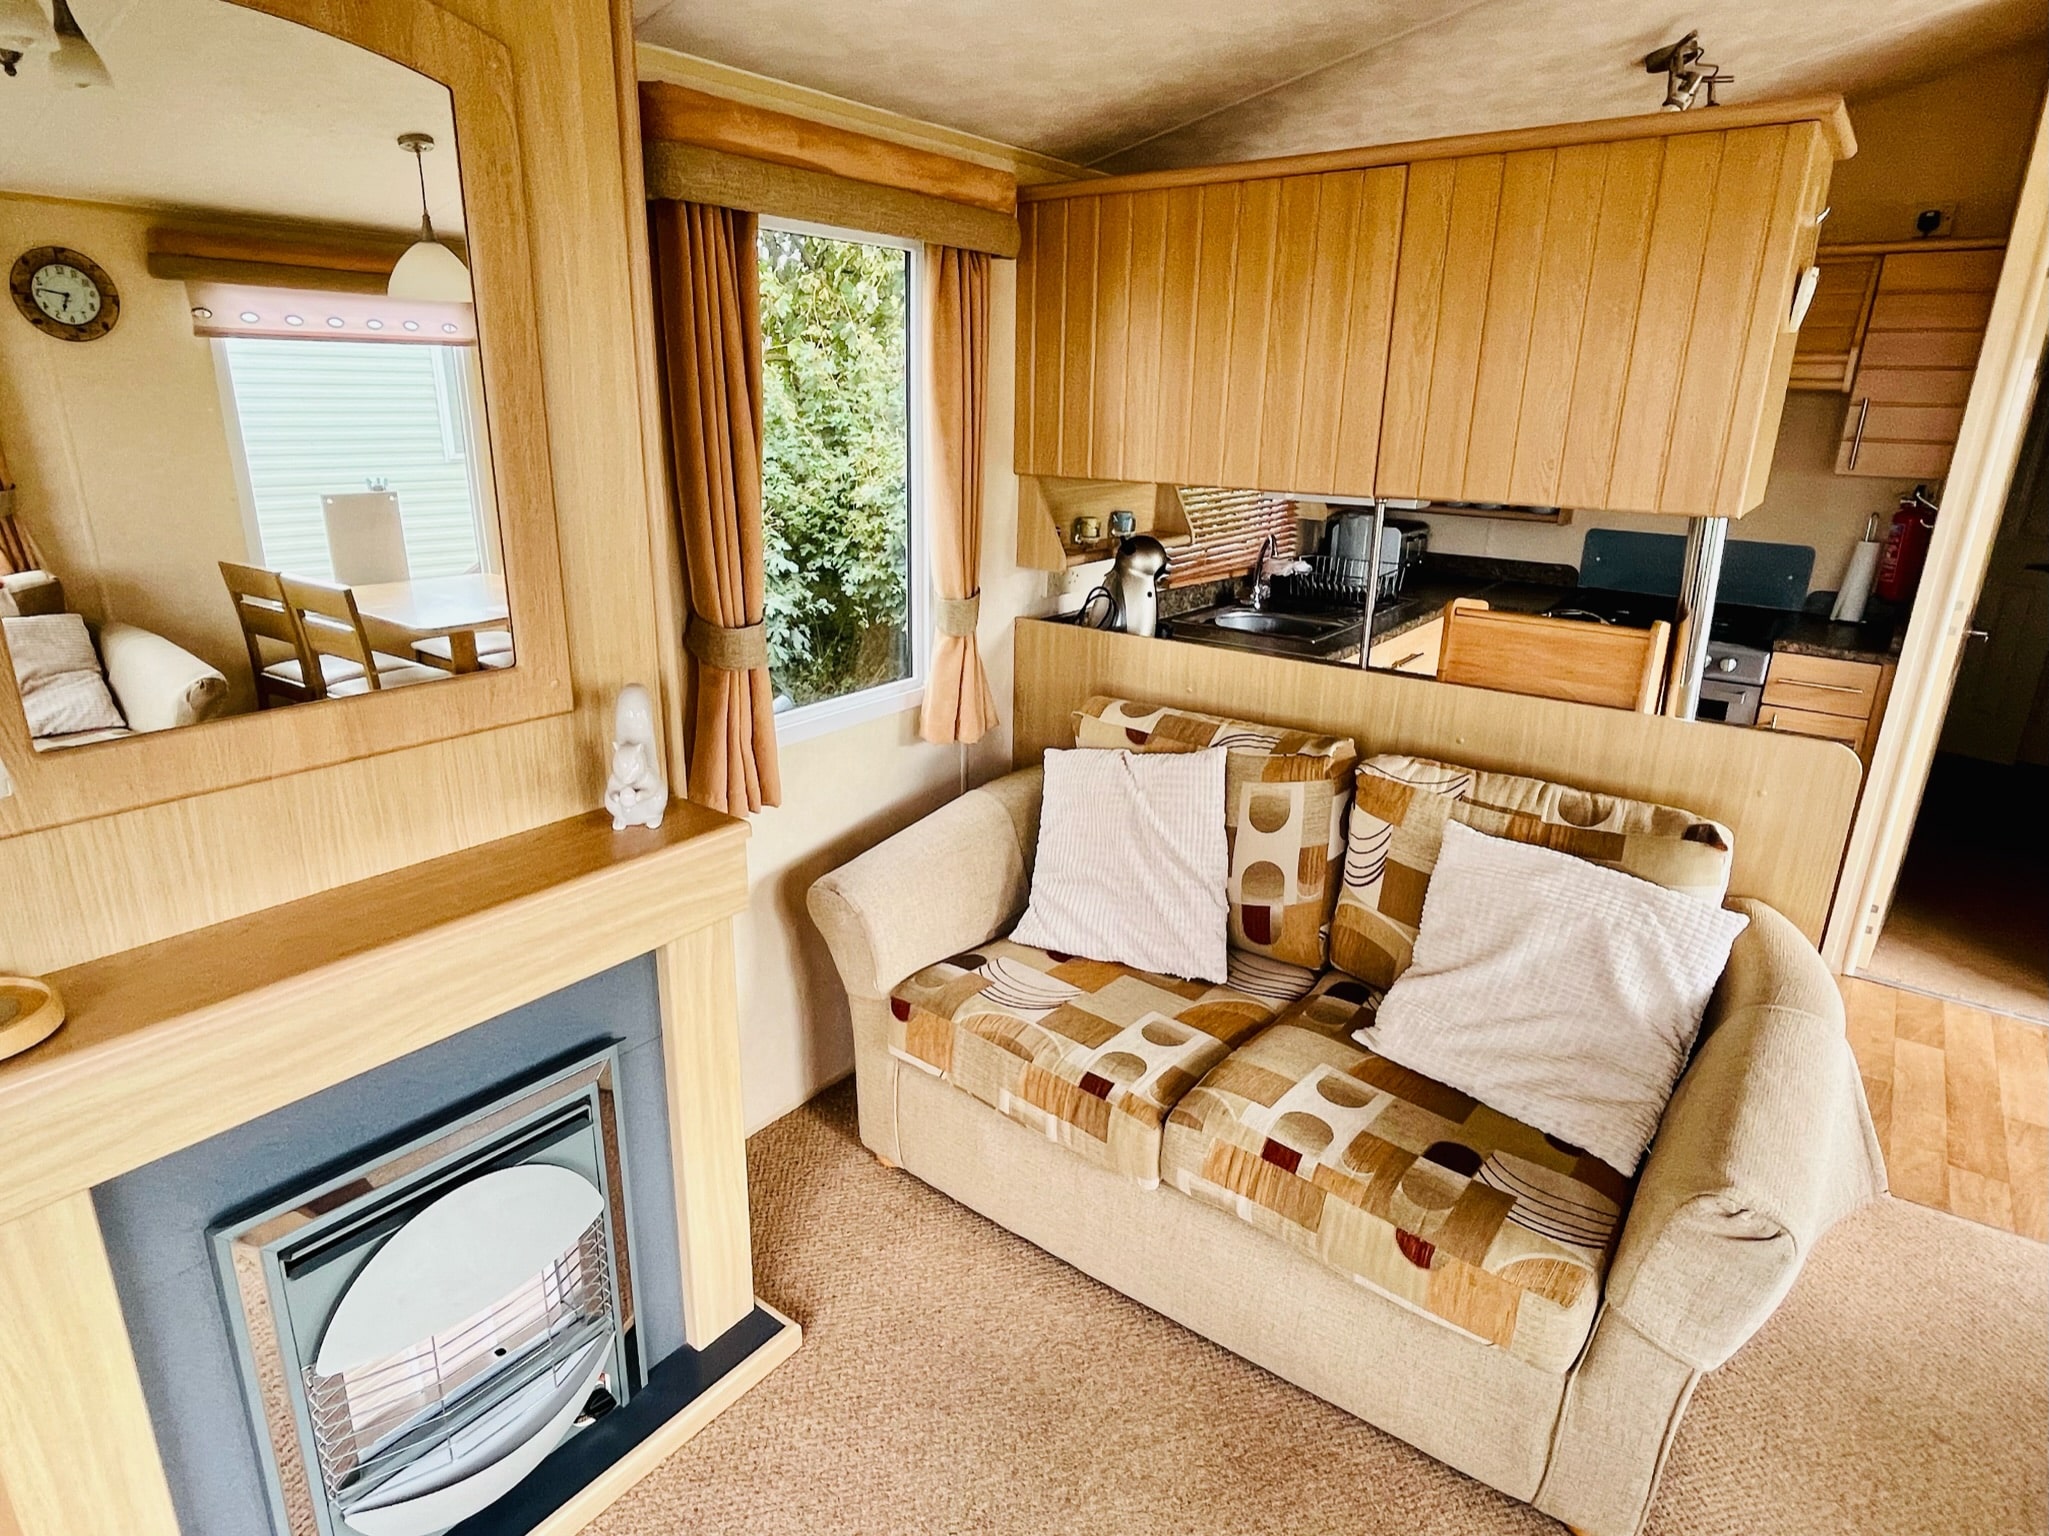 Used static caravan for sale at St Audries Bay Holiday Club, Somerset